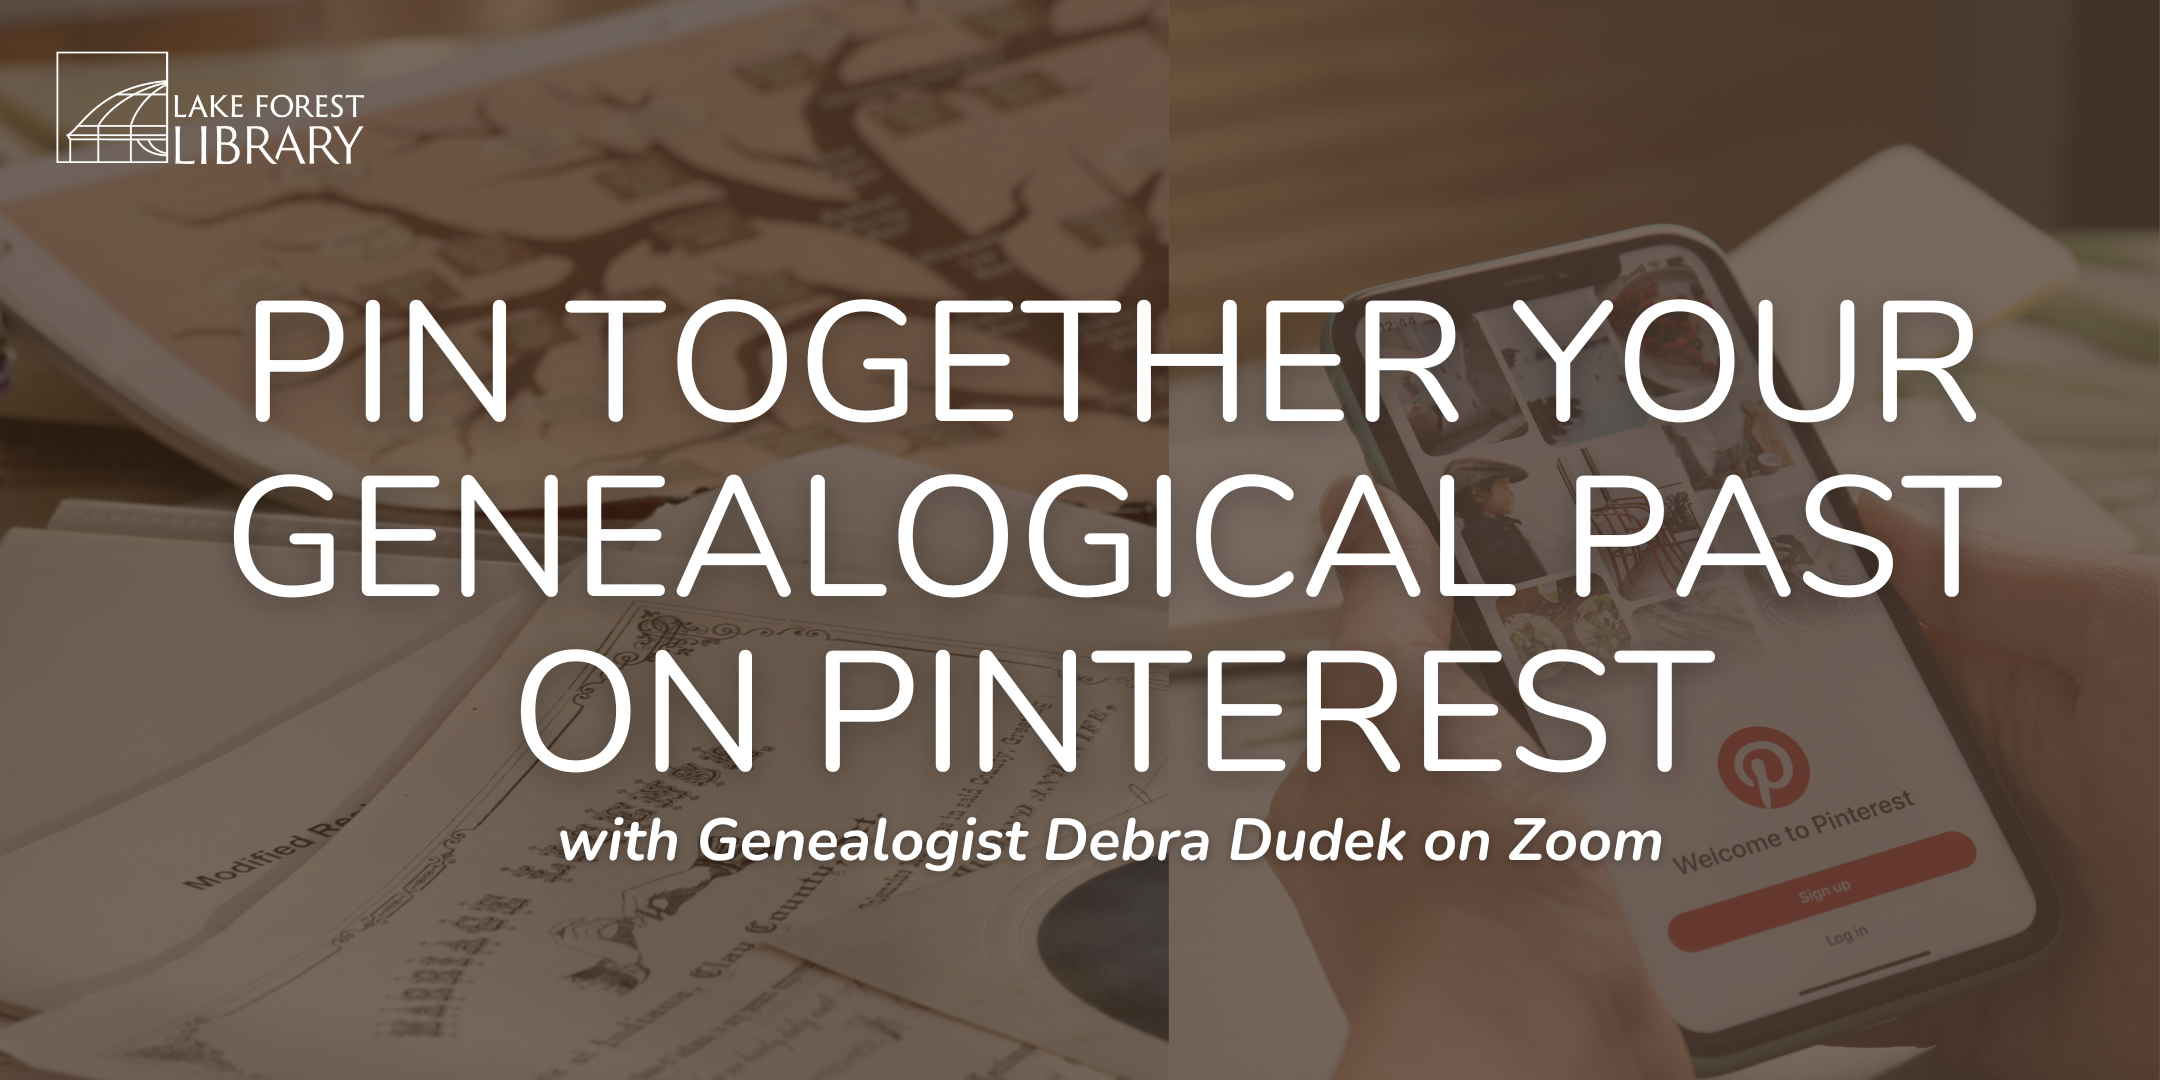 image of "Pin Together Your Genealogical Past on Pinterest"